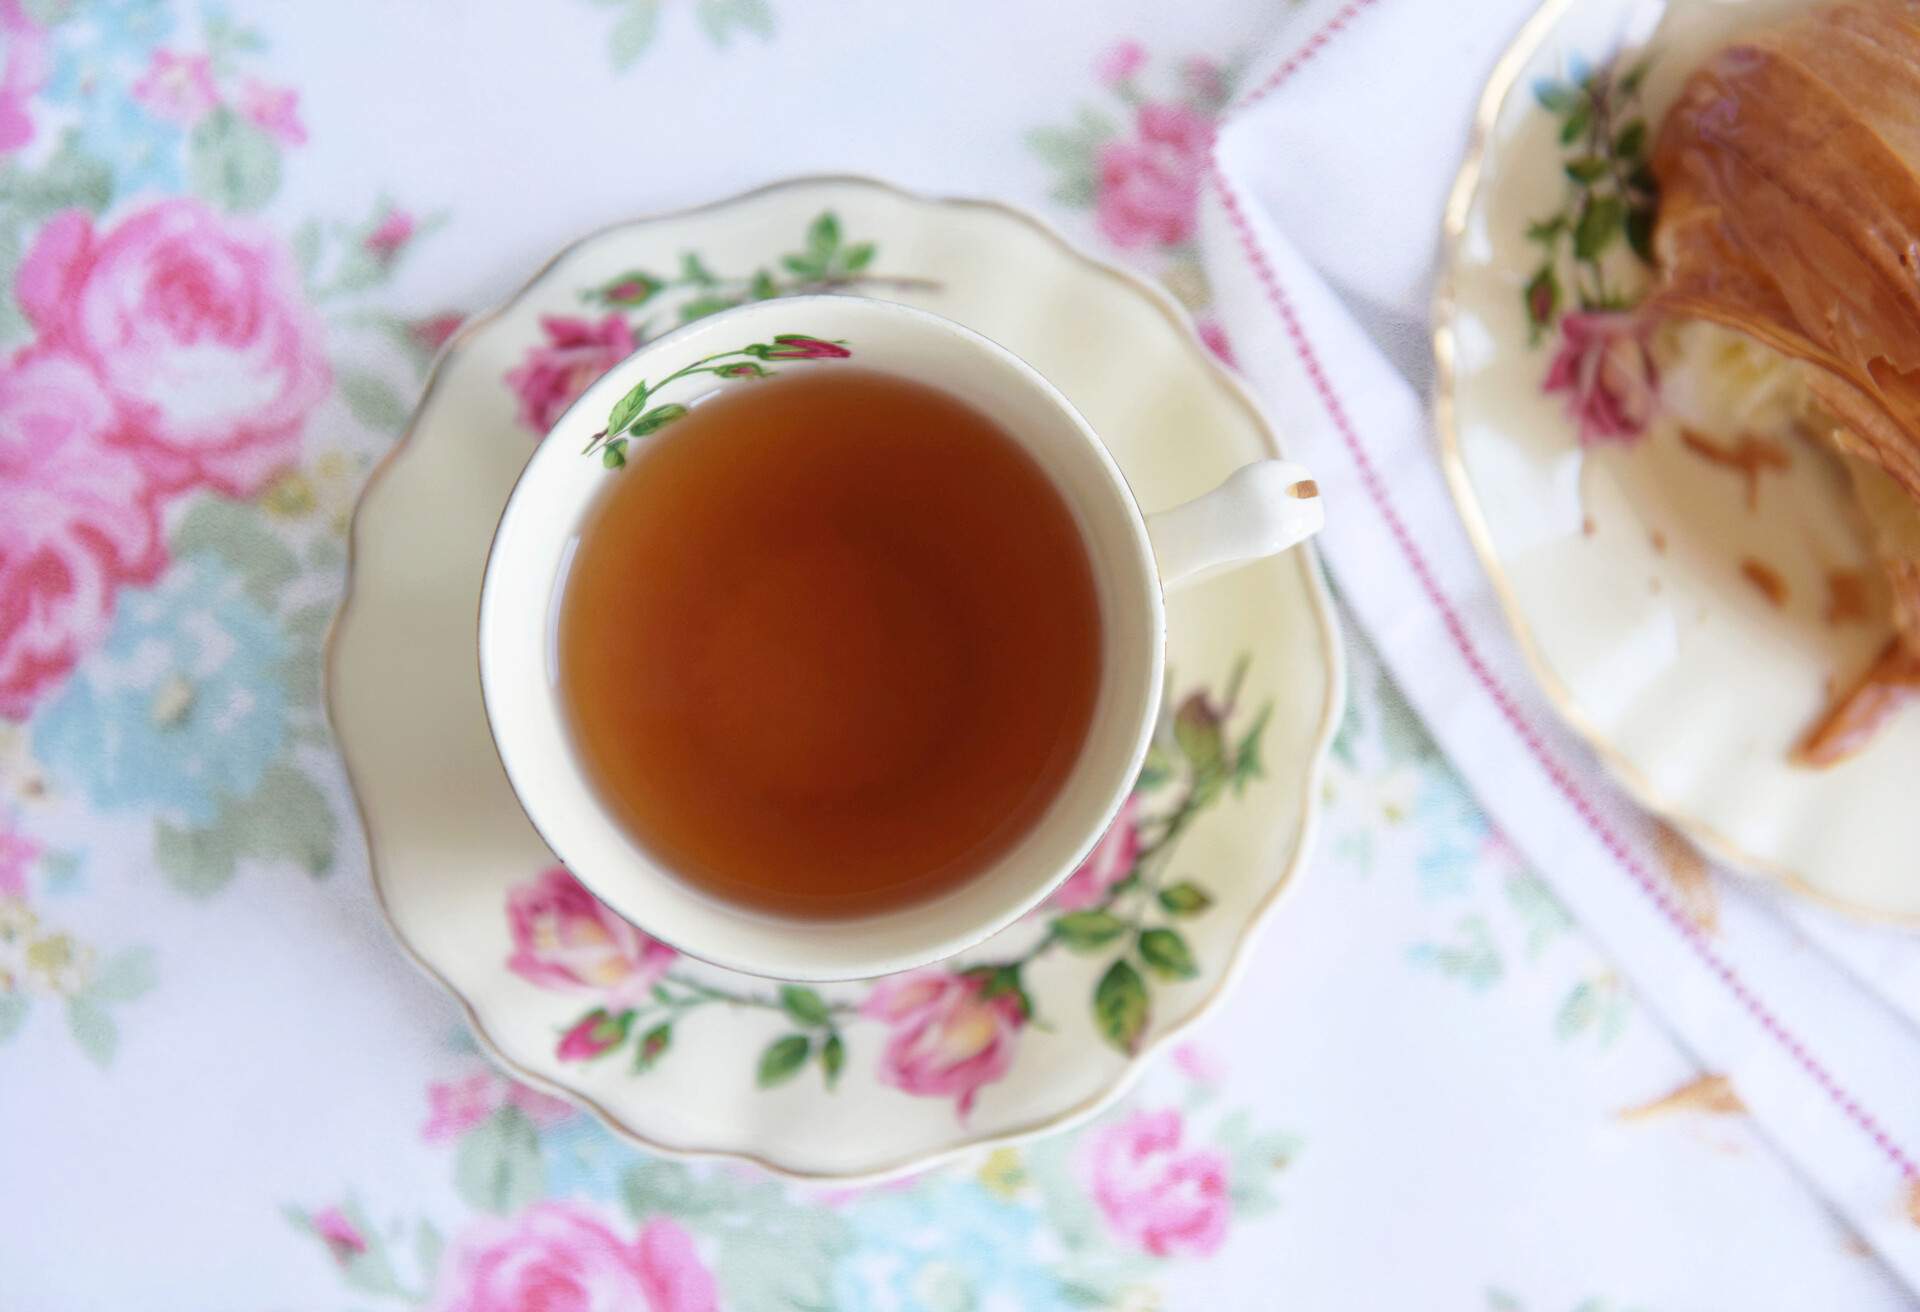 A refreshing cup of tea served on a pink rose cup and saucer set.